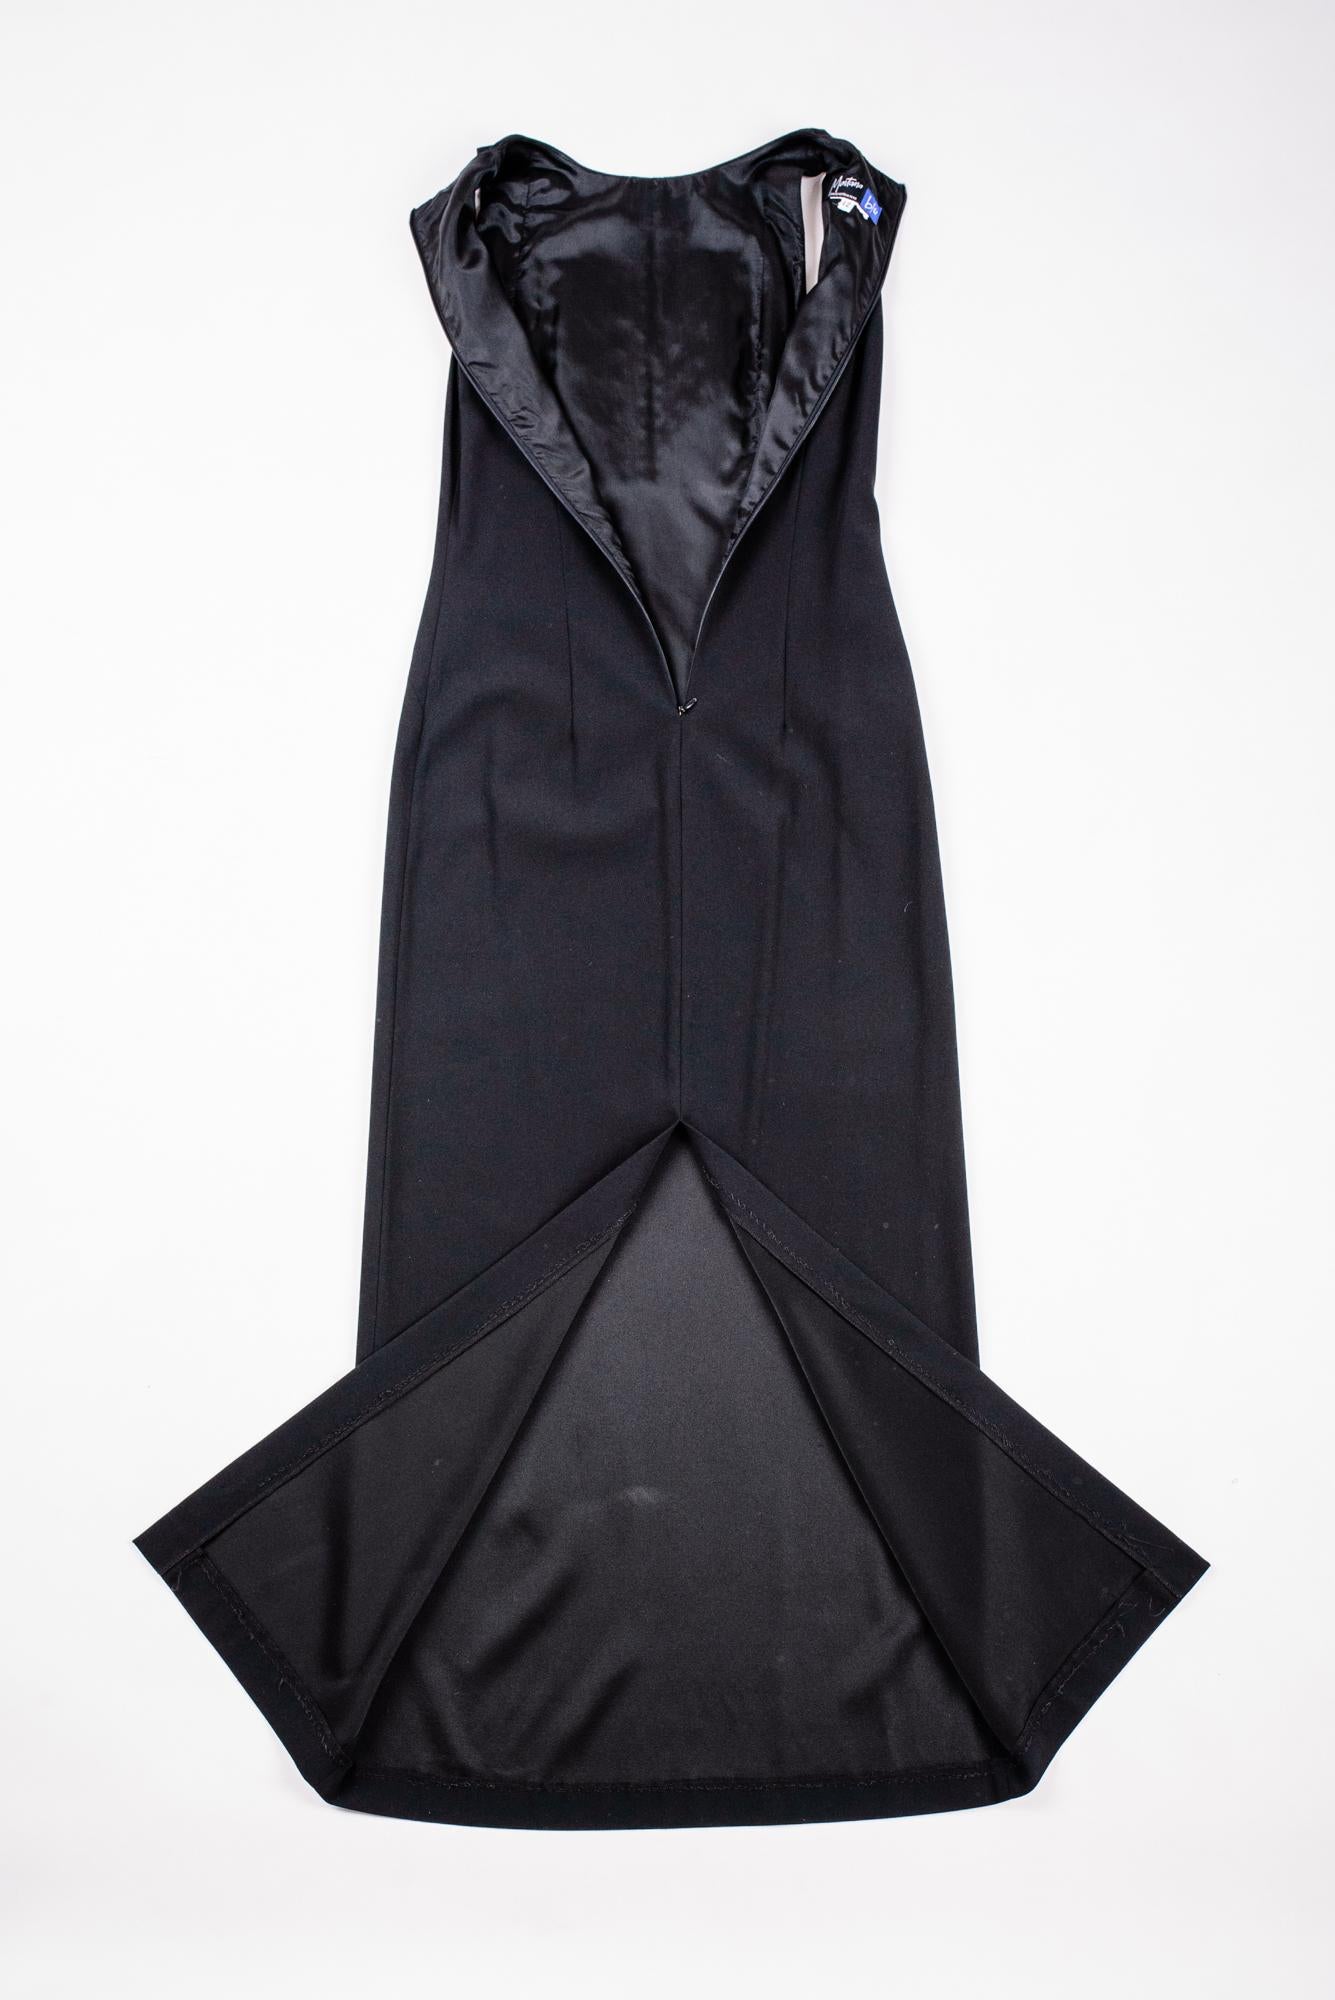 A Long Evening Black Dress by Claude Montana - French Circa 1999 In Good Condition For Sale In Toulon, FR